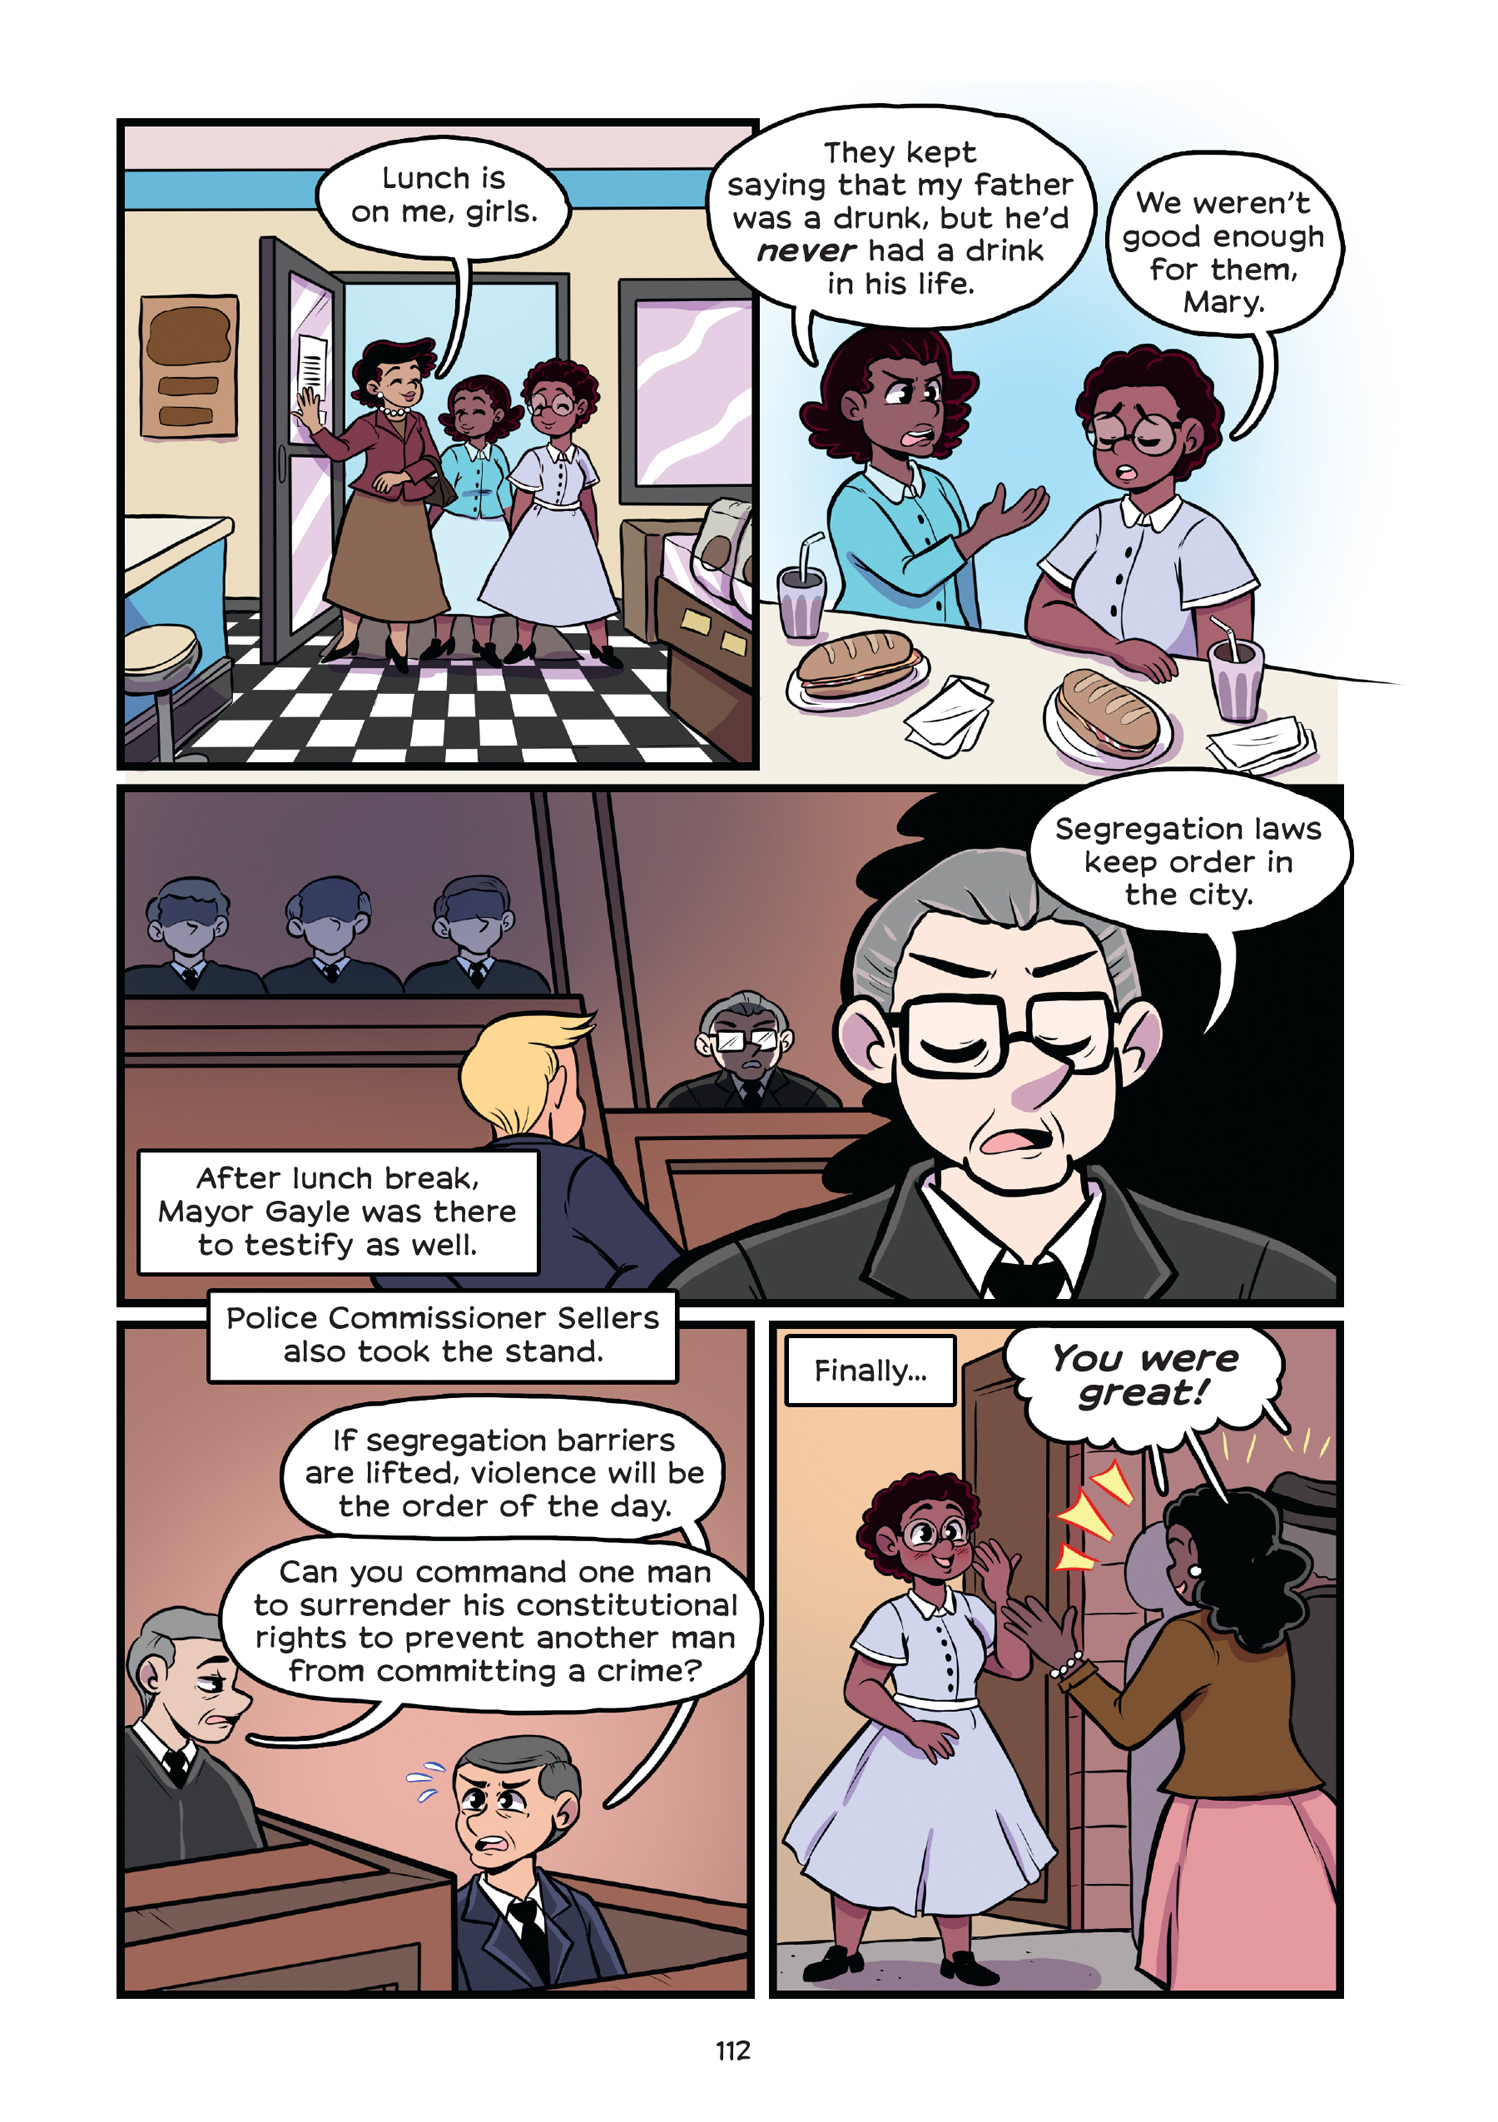 Read online History Comics comic -  Issue # Rosa Parks & Claudette Colvin - Civil Rights Heroes - 117